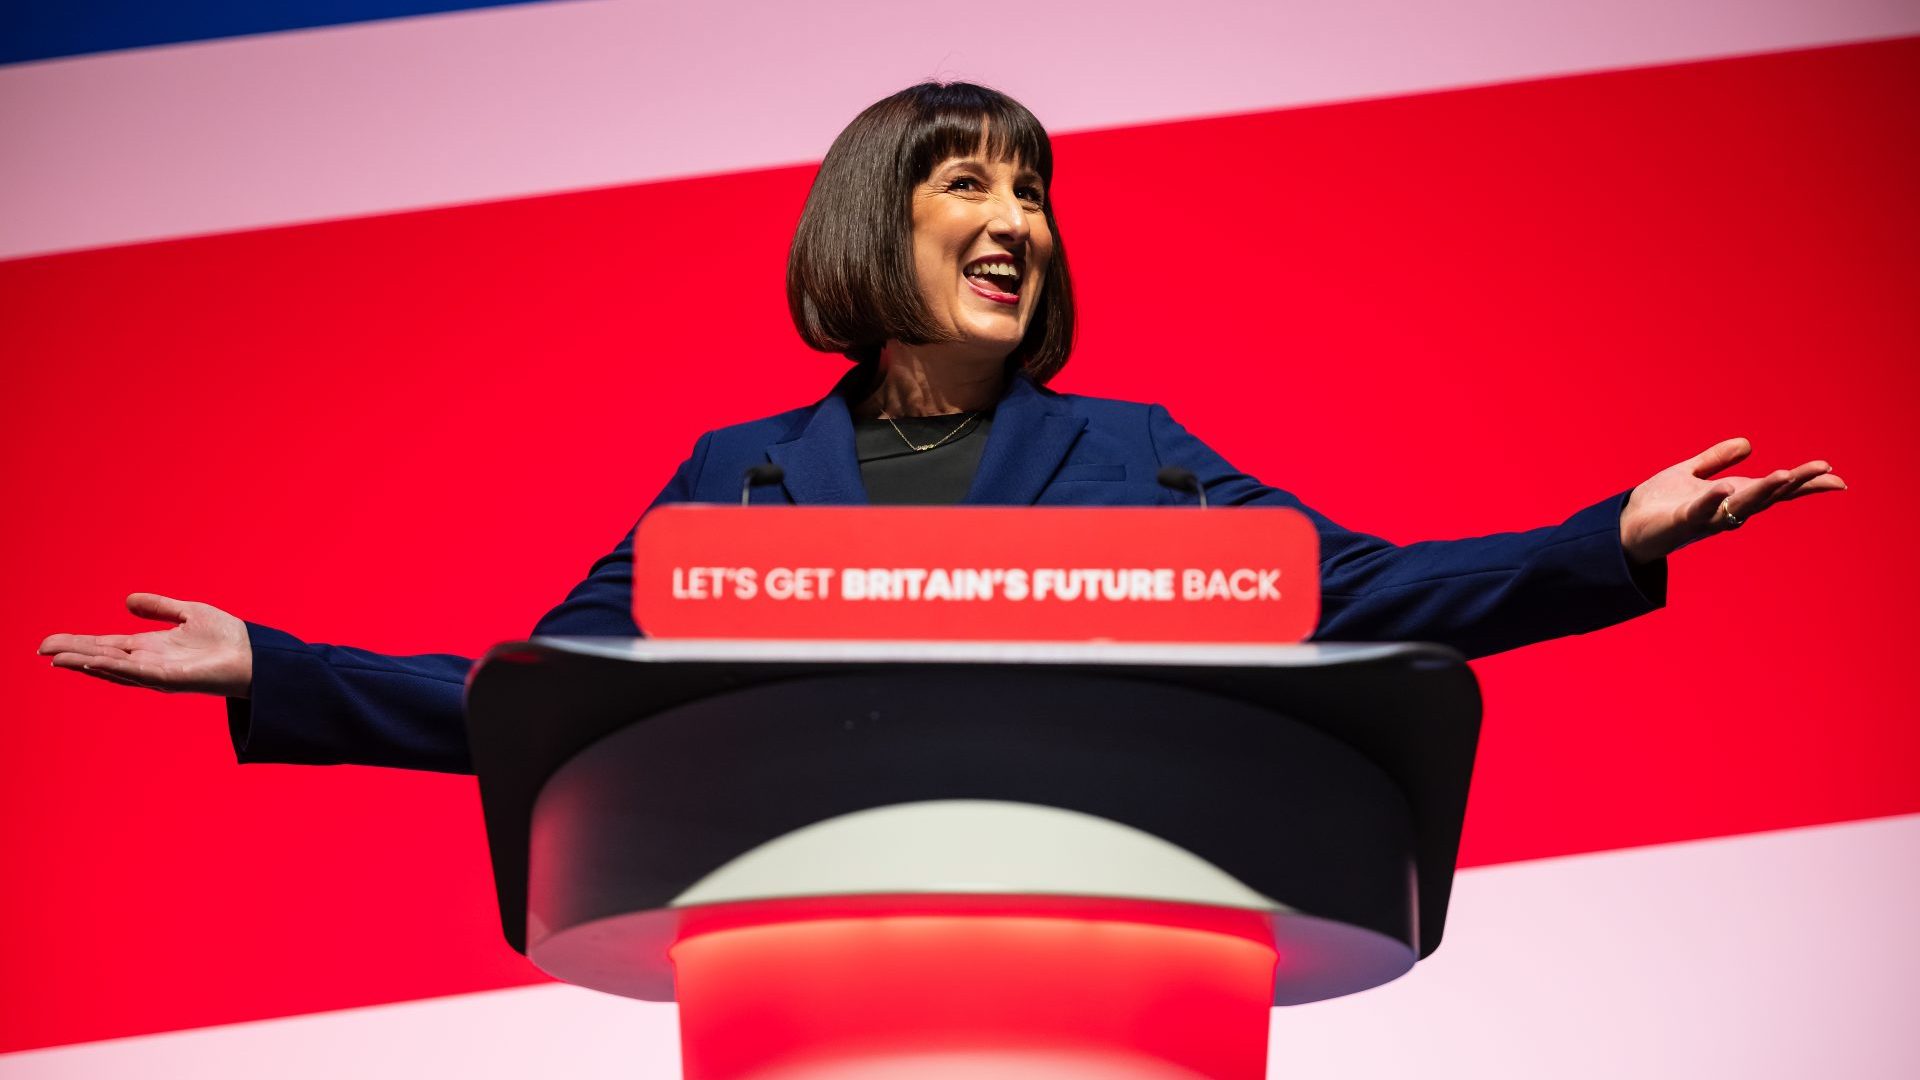 Rachel Reeves MP, Shadow Chancellor of the Exchequer delivers her keynote speech to party delegates on day two of the Labour Party conference. Photo: Leon Neal/Getty Images